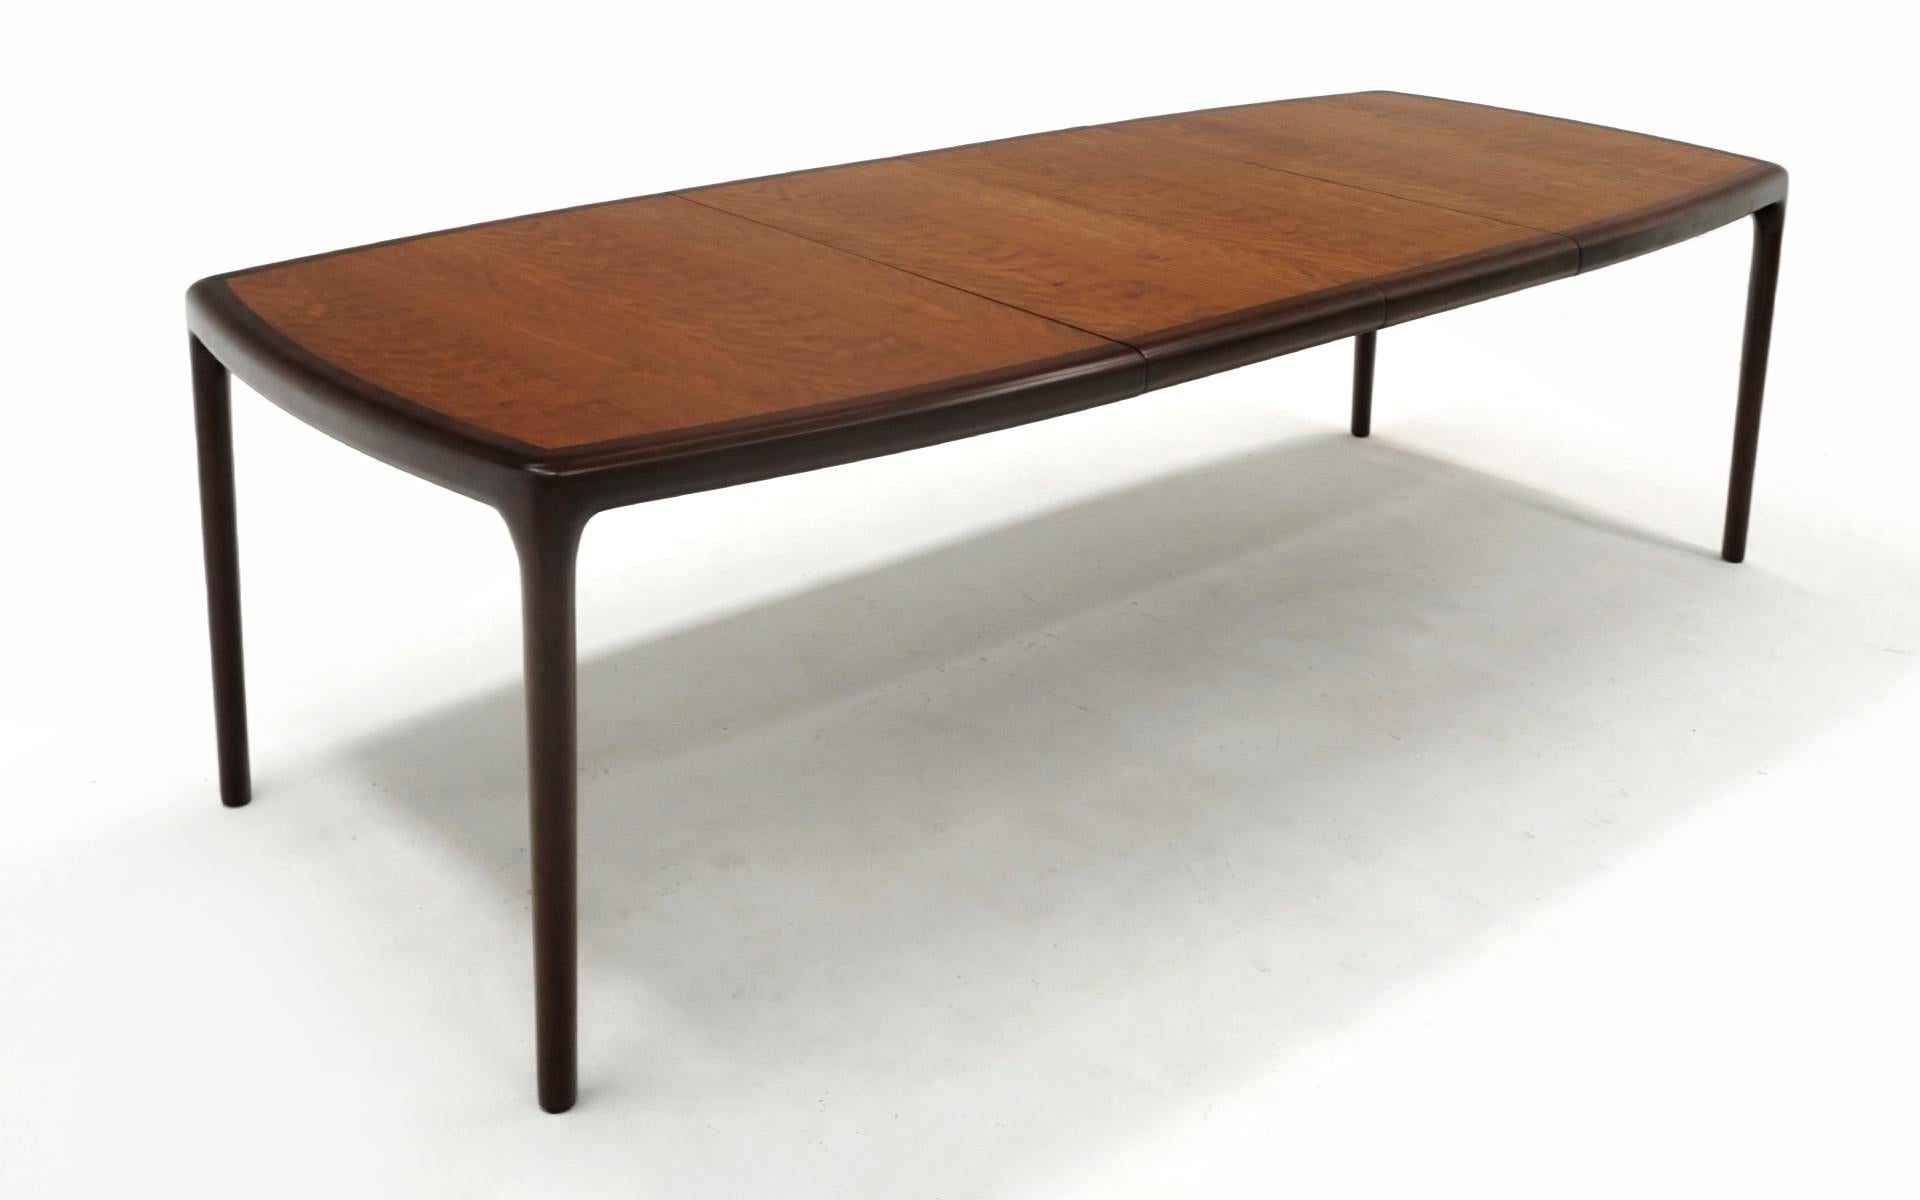 American Dining Table in Cherry by Edward Wormley for Dunbar, Expertly Refinished